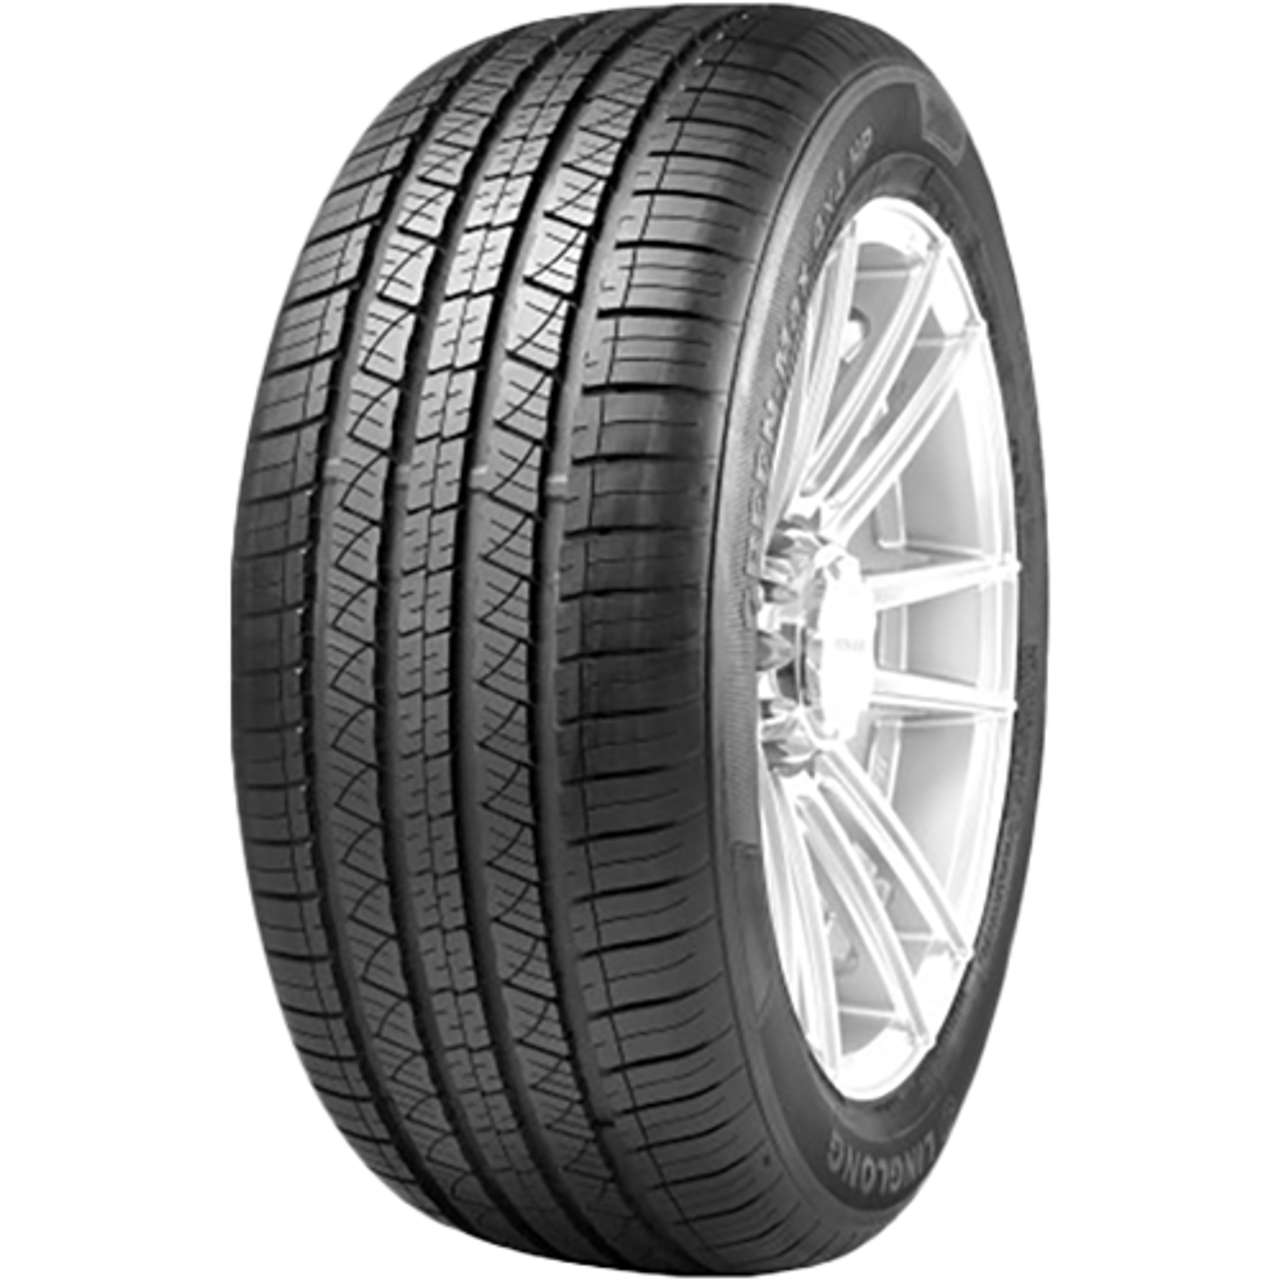 LINGLONG GREEN-MAX 4X4 HP 205/70R15 96H BSW von LINGLONG